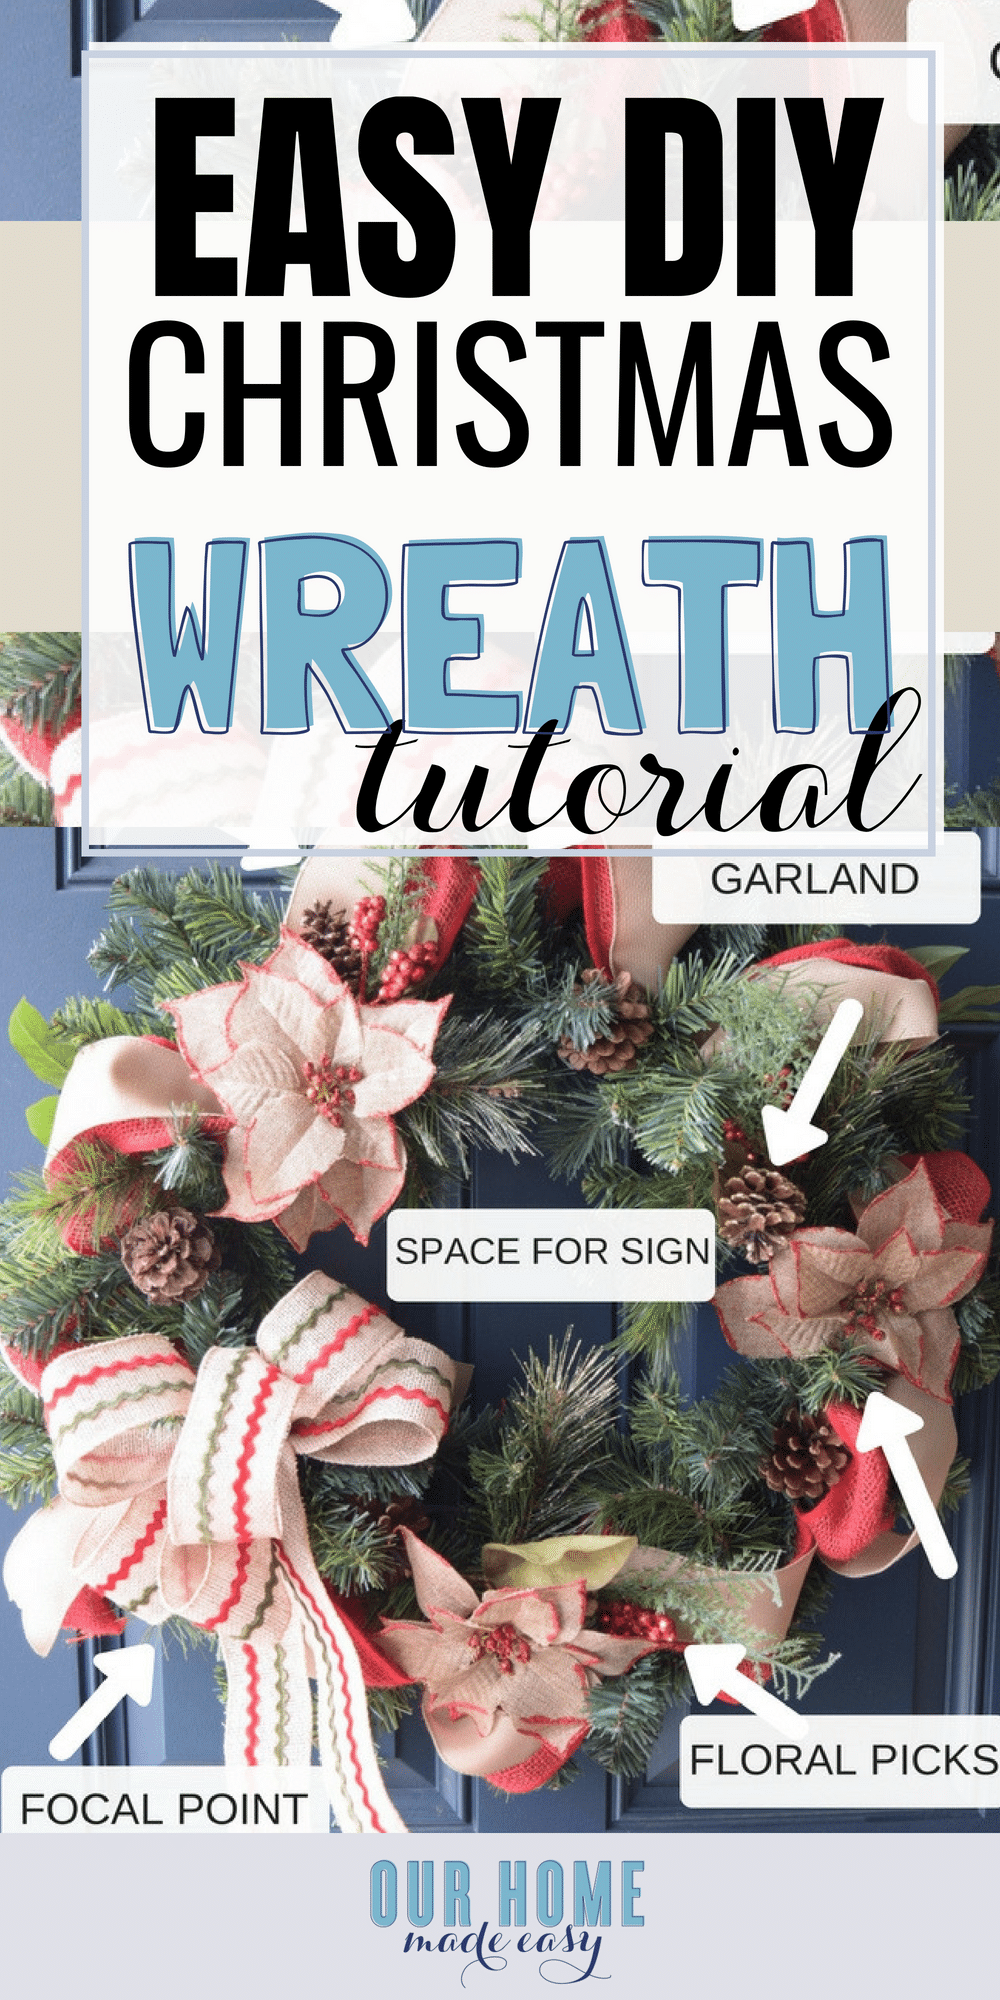 Make this pretty Christmas wreath with this simple formula! Now you can have a Pinterest inspired wreath easily (and its mistake proof)! #Chrismas #home #wreath #homedecor